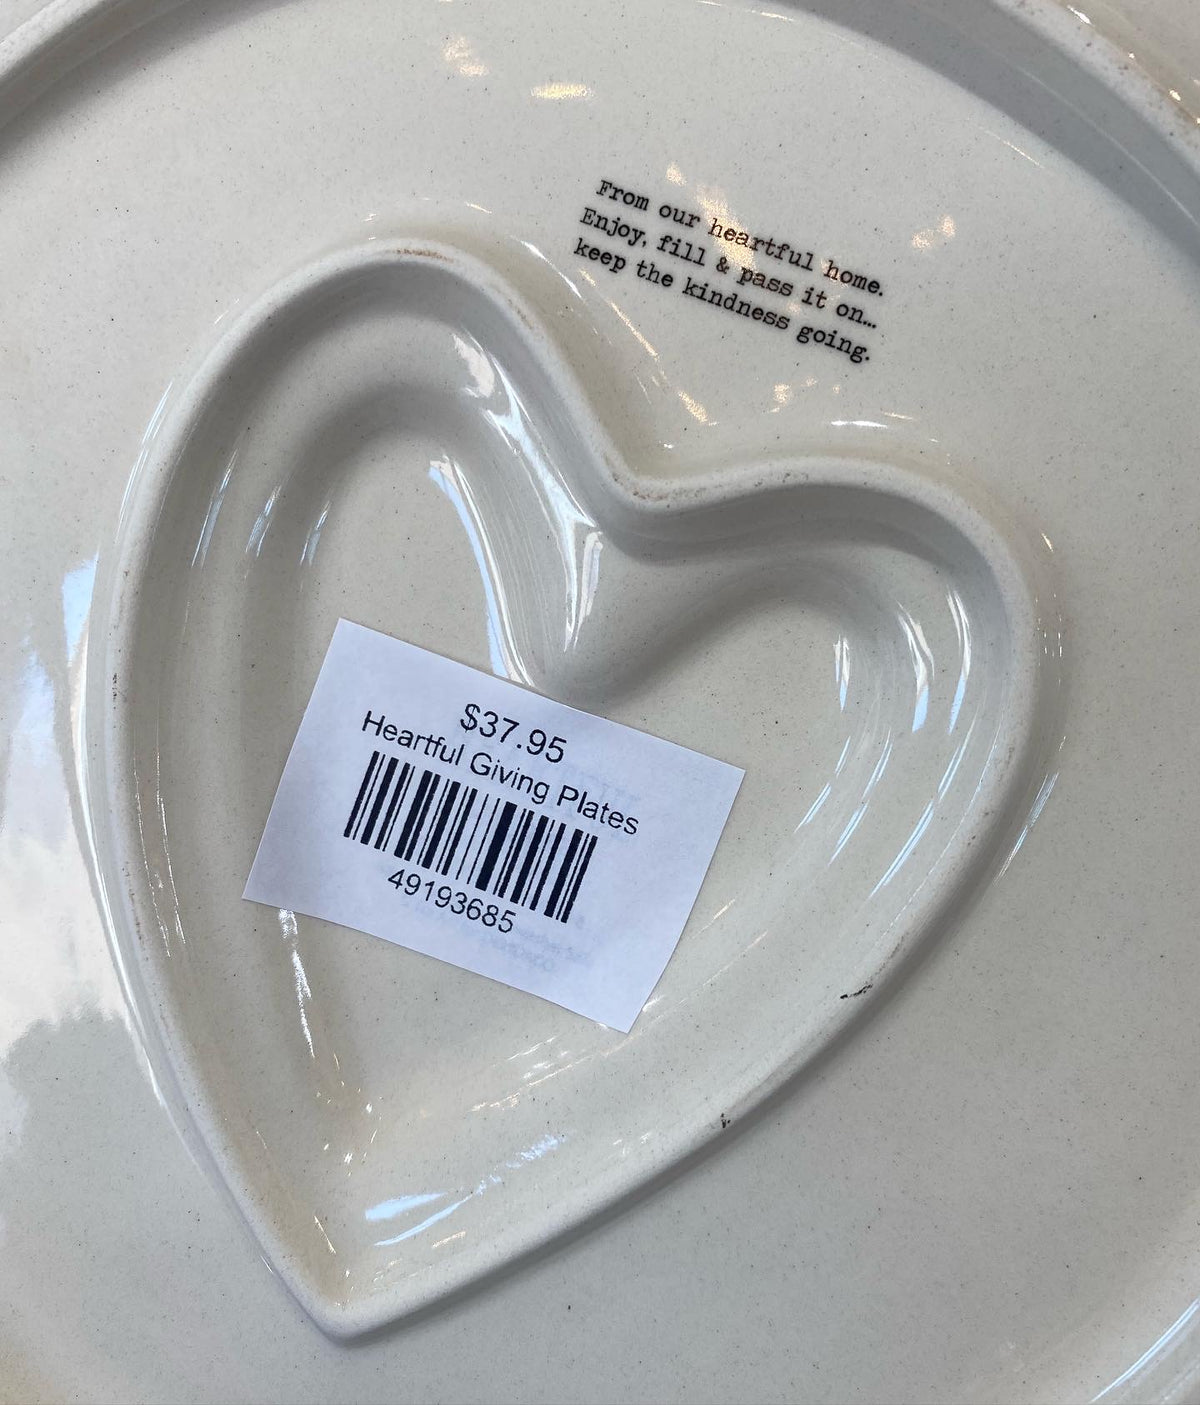 Heartful Giving Plates